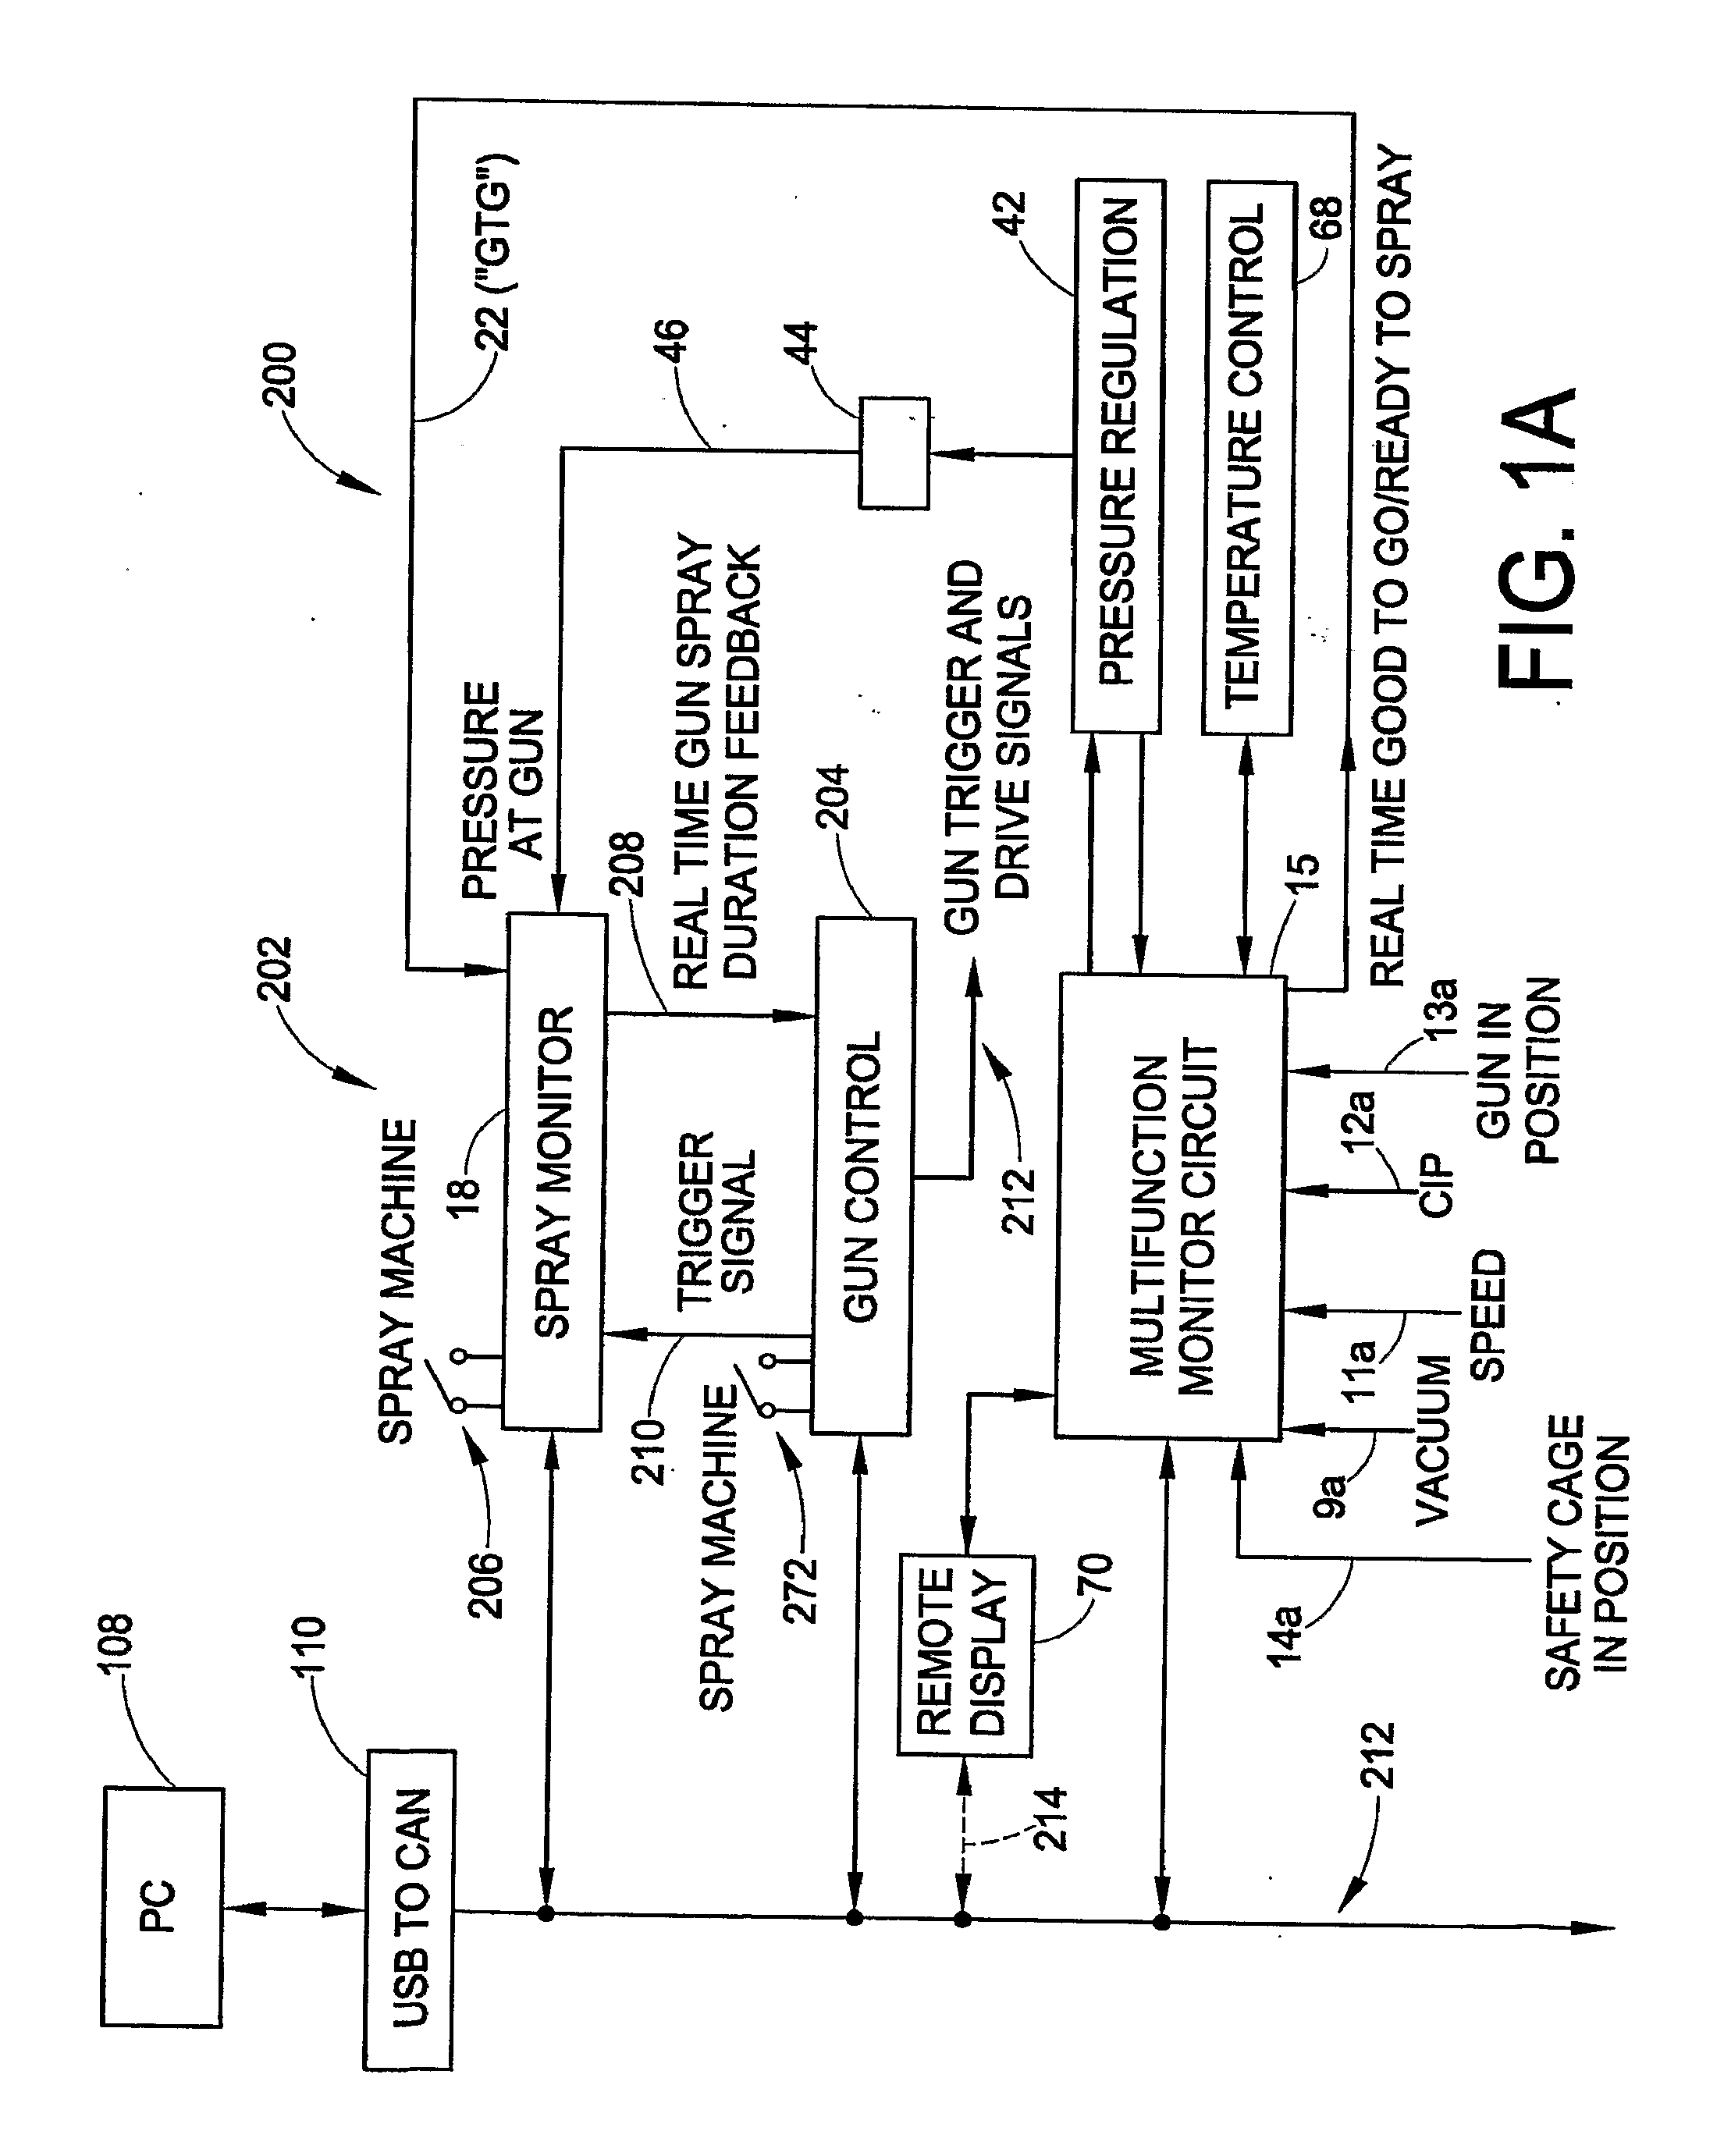 Control system for can coating